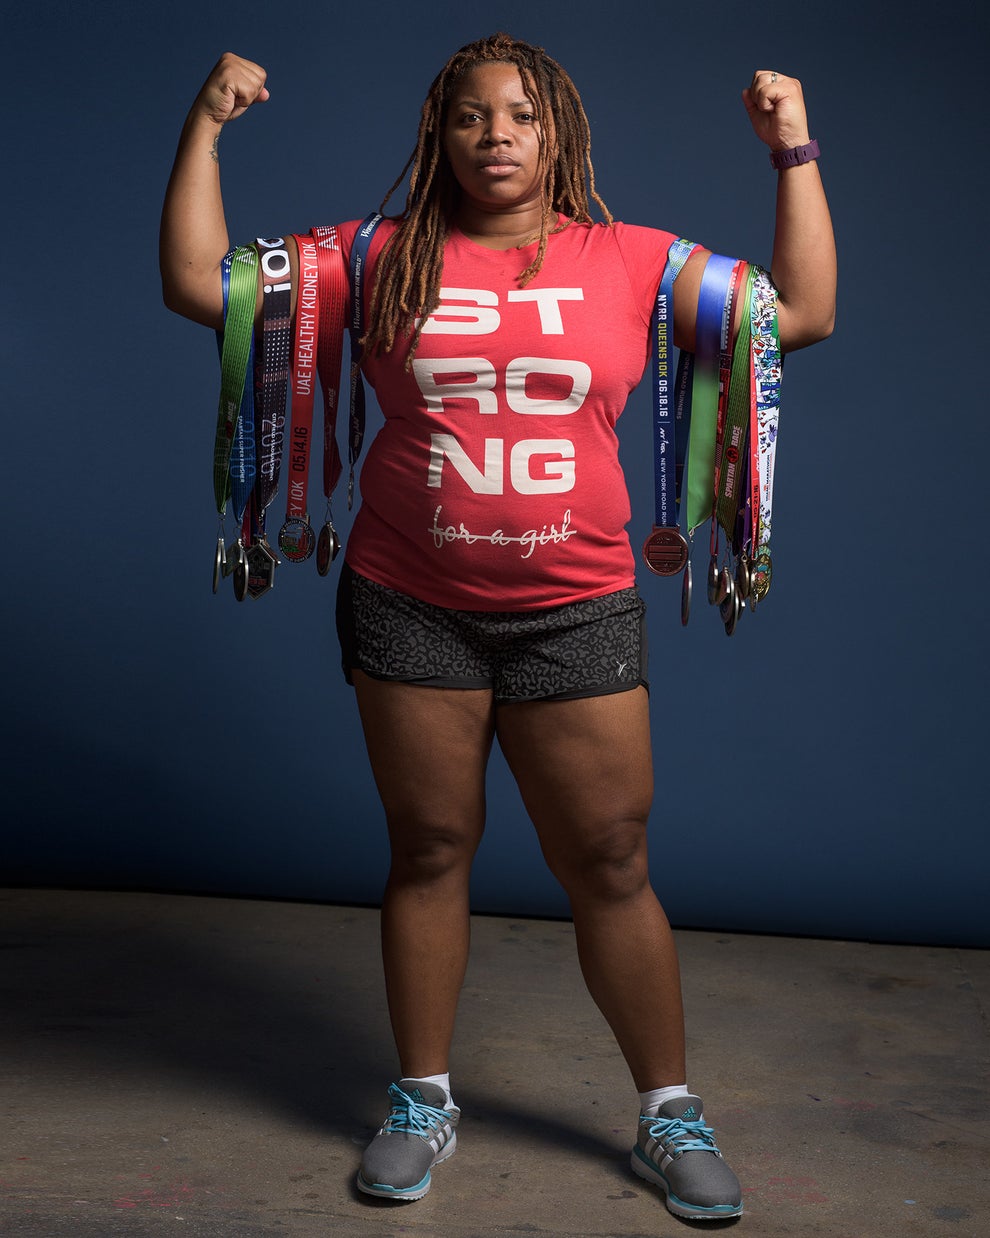 7 Plus-Size Athletes Breaking Down Stereotypes